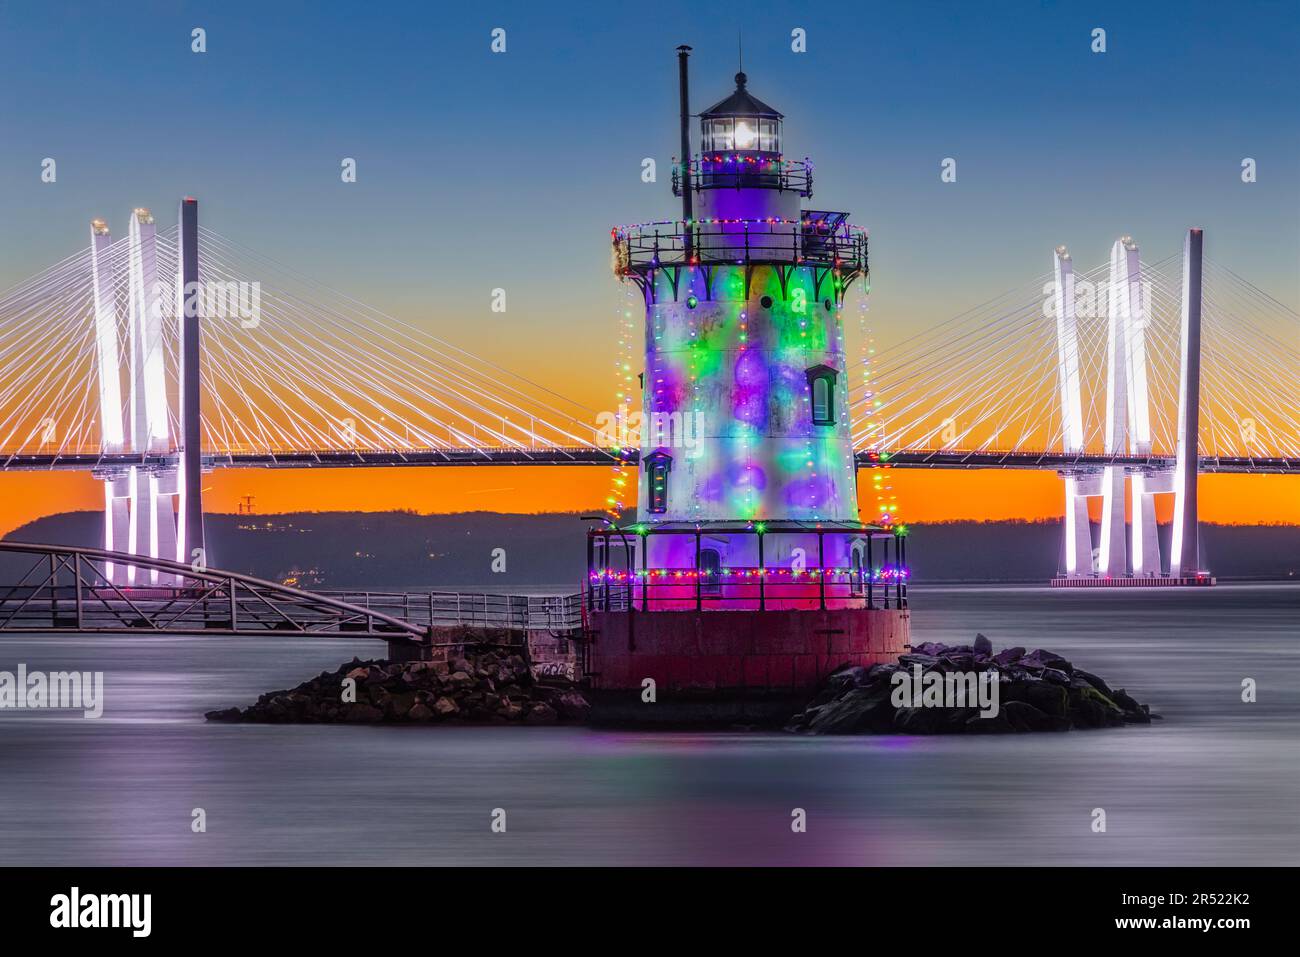 NY Tarrytown Lighthouse - Illuminated with Christmas holiday decorations with the Tappan Zee Bridge, officially named the Governor Mario M. Cuomo Brid Stock Photo